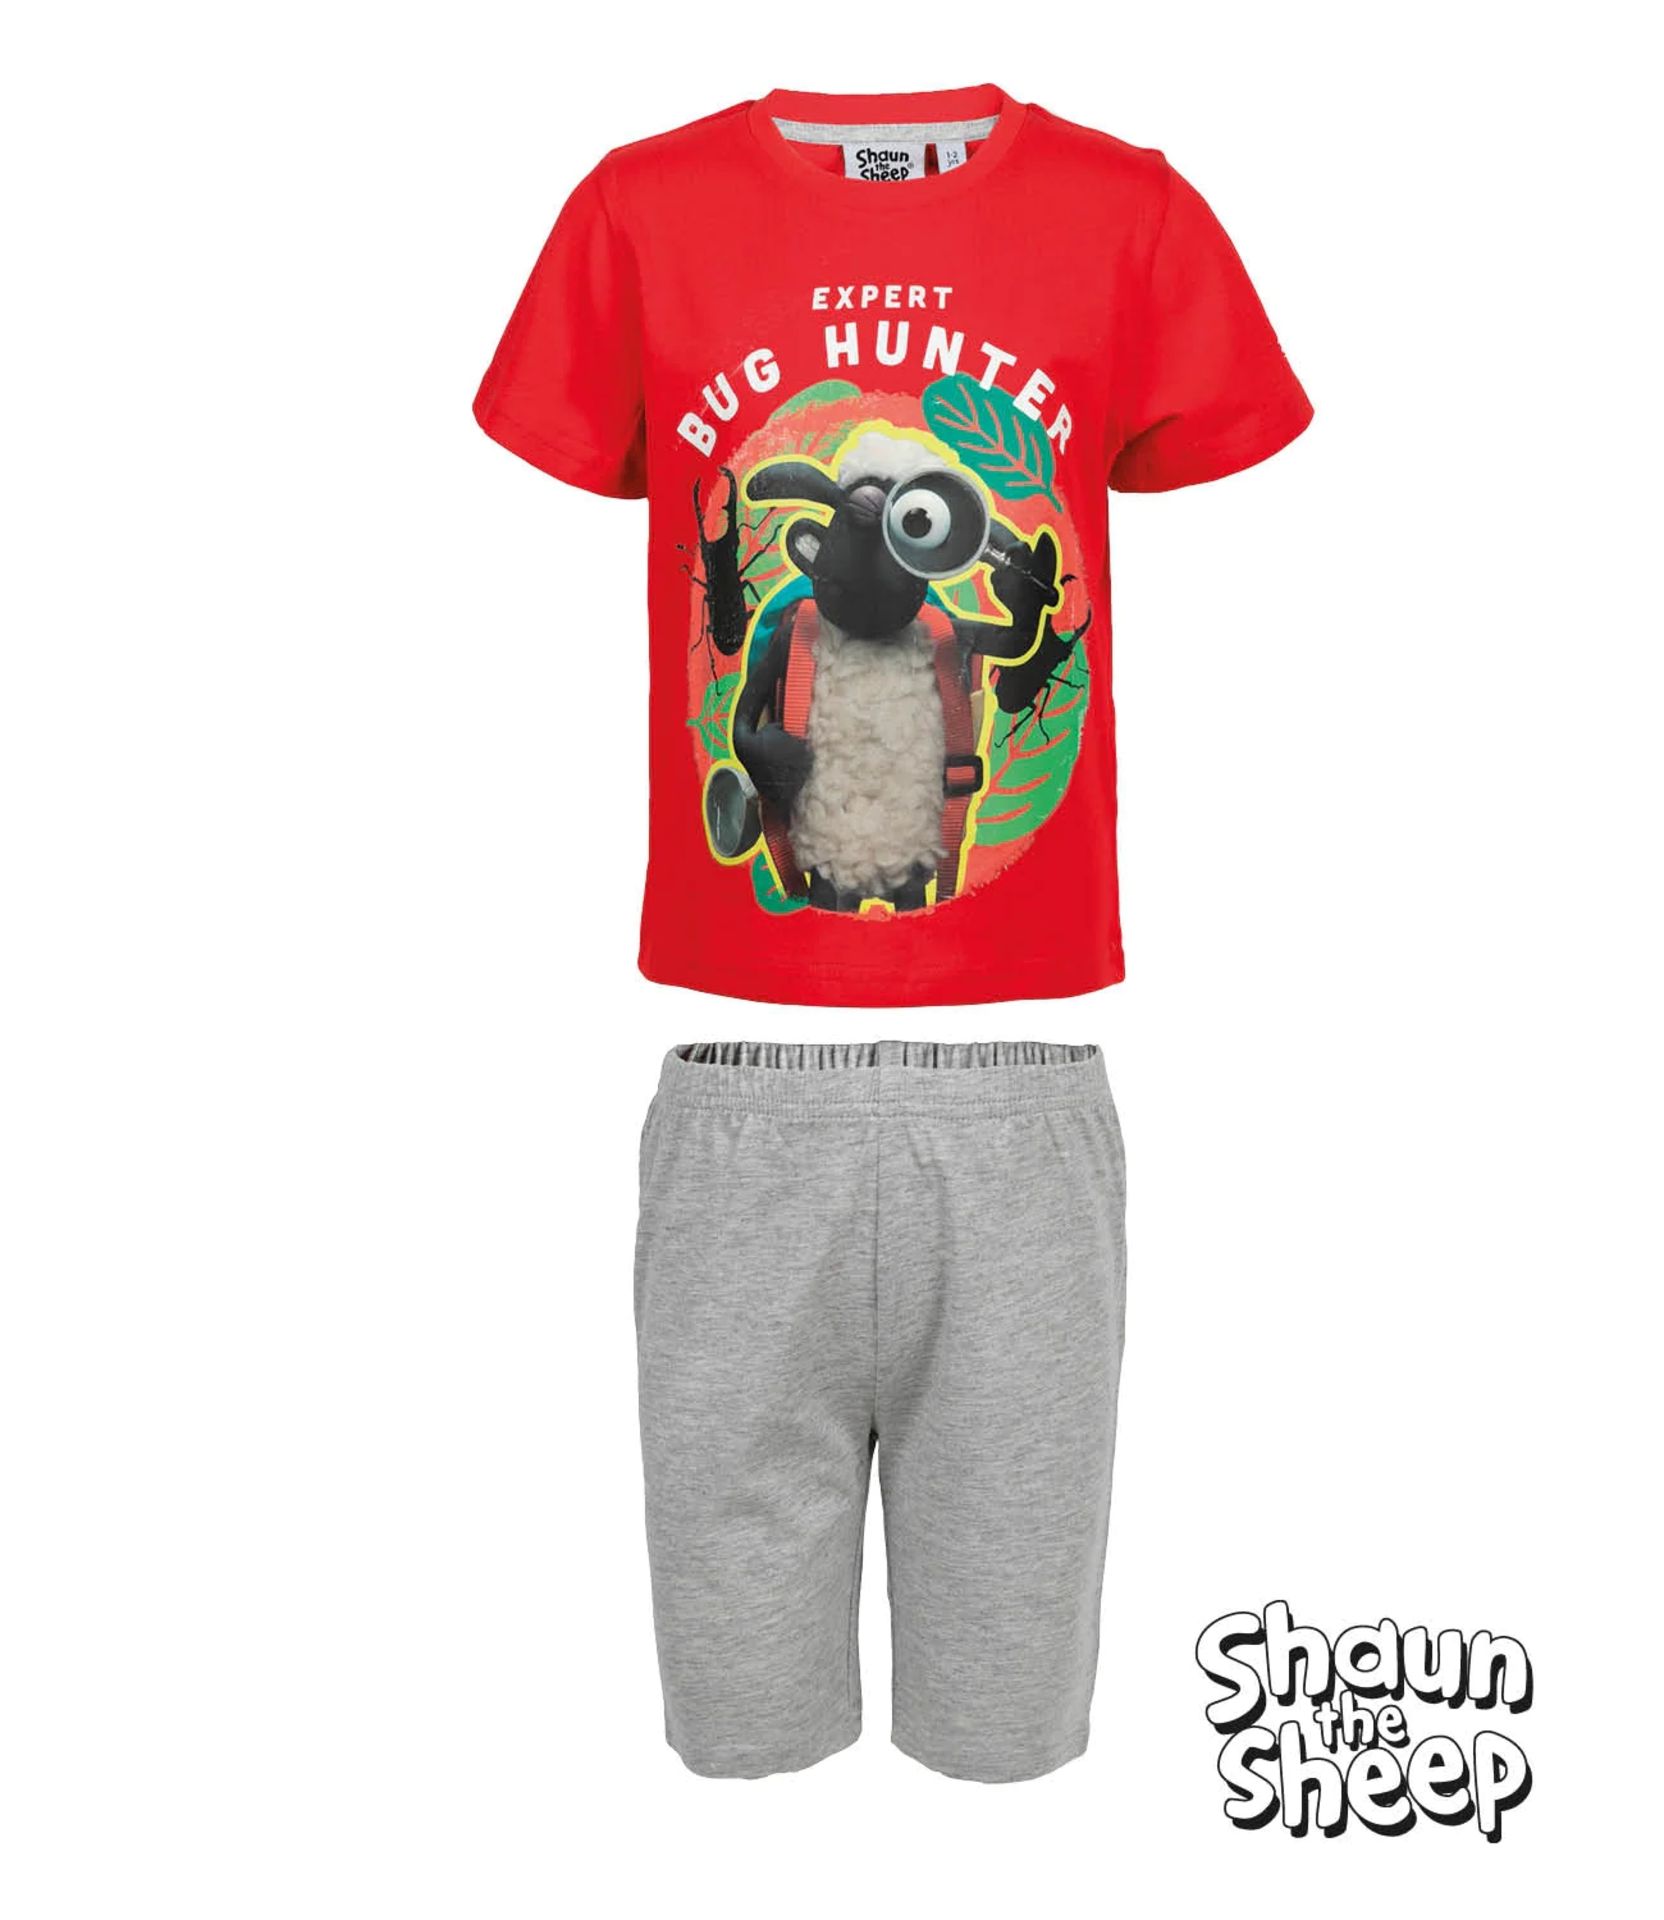 24 x New & Packaged Official Licenced Shaun The Sheep Pajamas. Sizes: 1-2, 3-4, 5-6 & 7-8. RRP £14. - Image 2 of 2